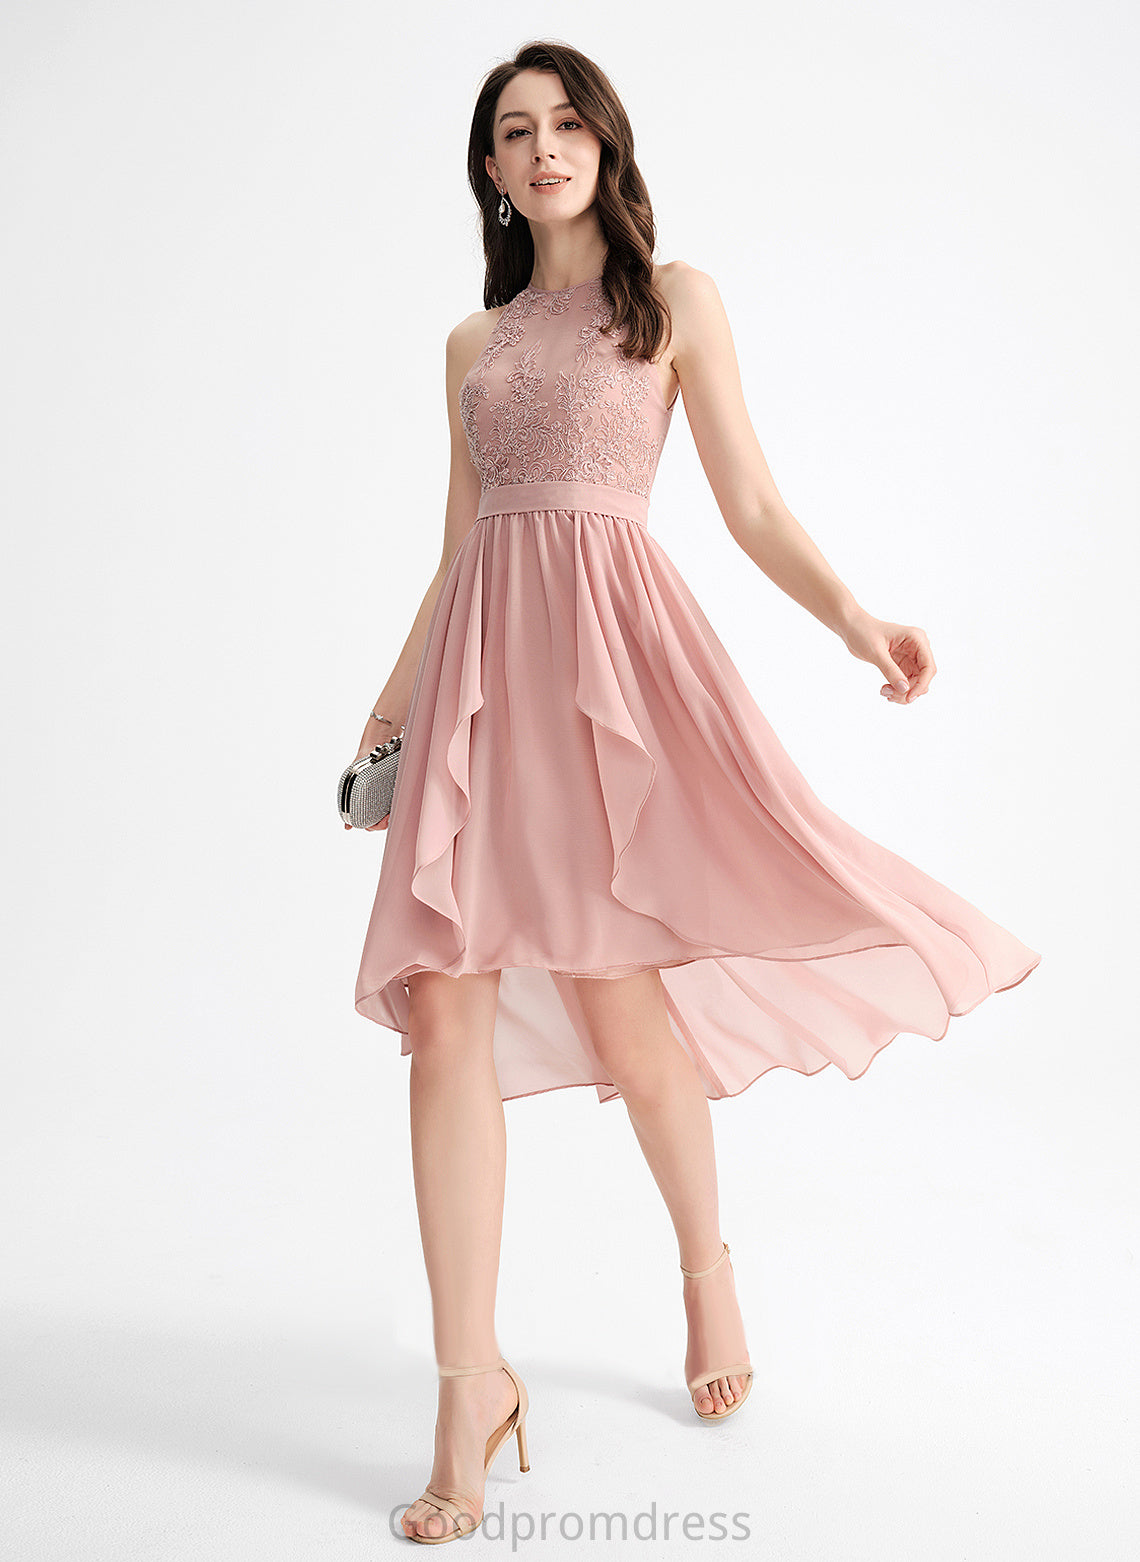 A-Line Scoop Neck Asymmetrical Lace Homecoming Kaylah With Dress Homecoming Dresses Chiffon